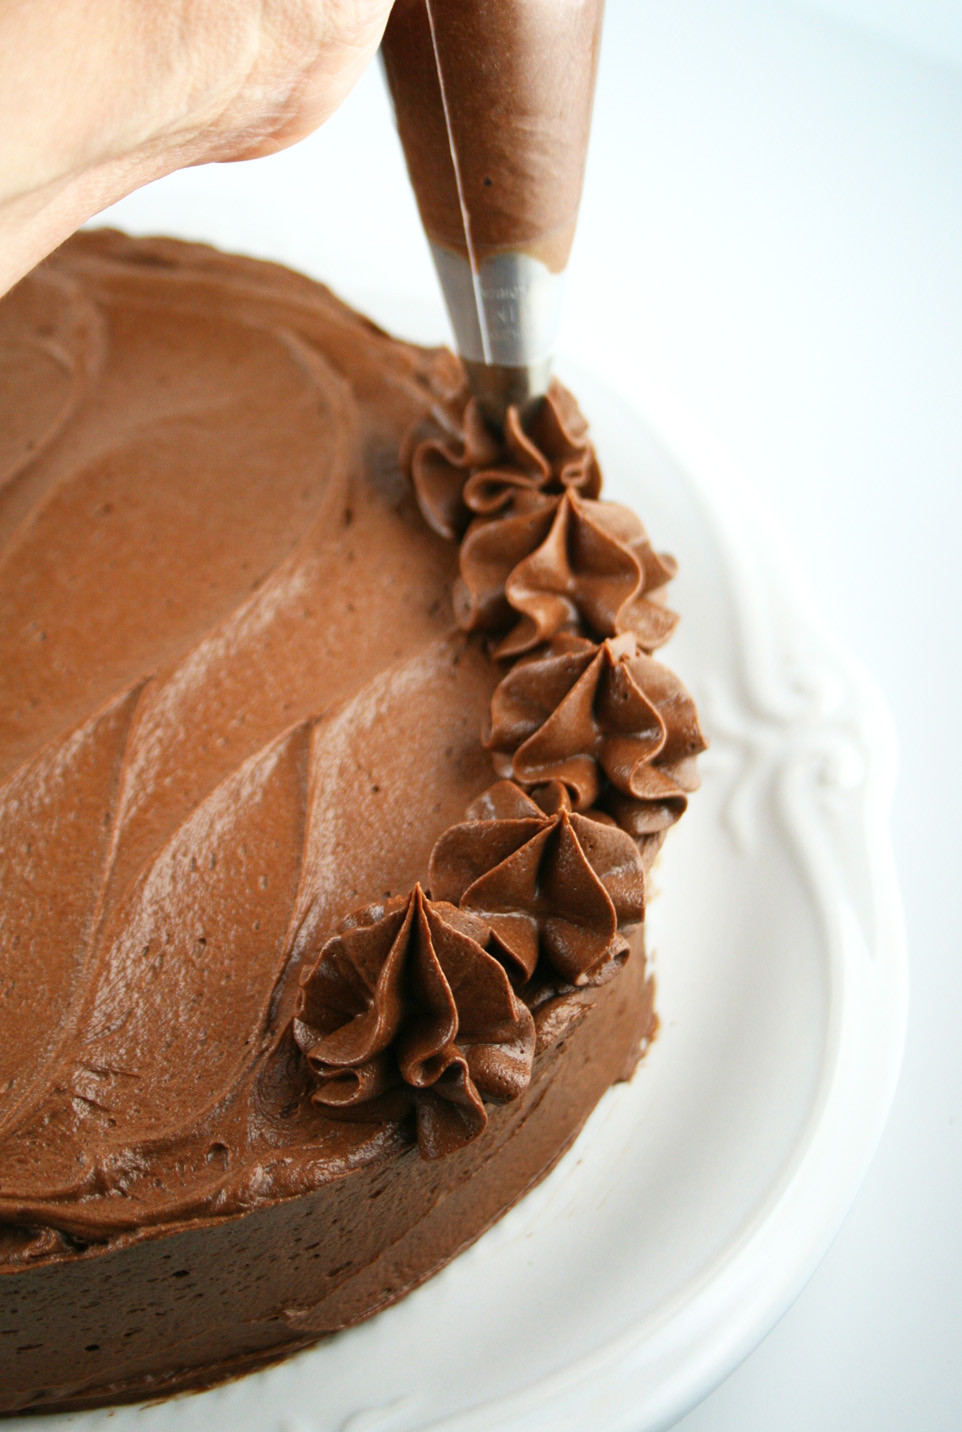 Best Frosting For Chocolate Cake
 Perfect Vanilla Cake with The Best Chocolate Frosting Ever